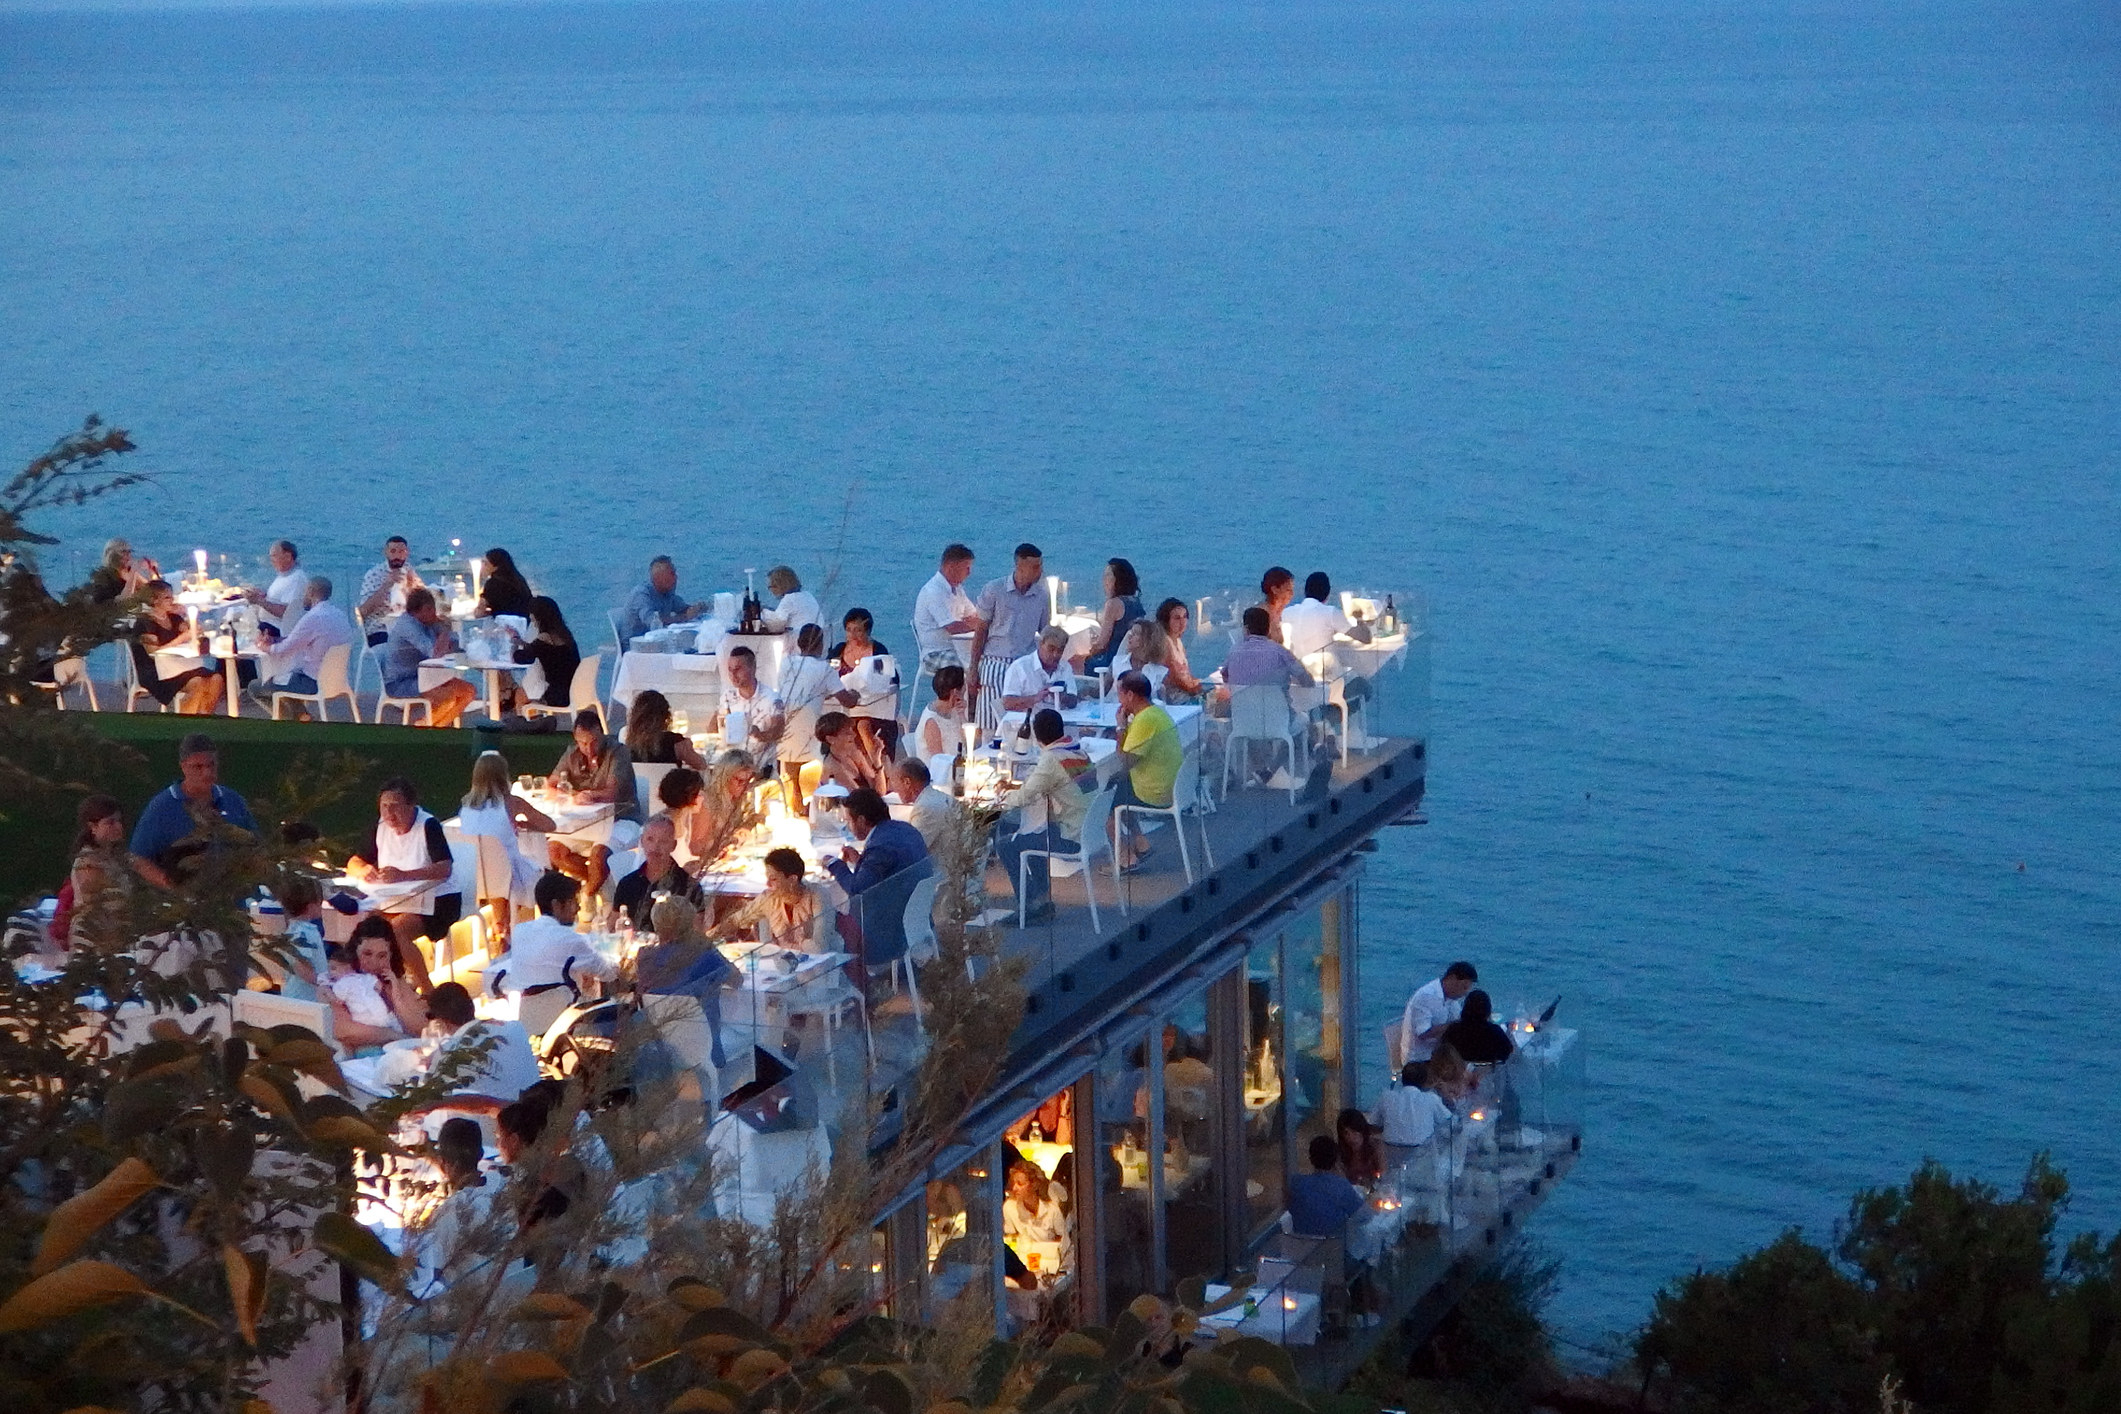 People dining outdoors in a restaurant overlooking the sea.